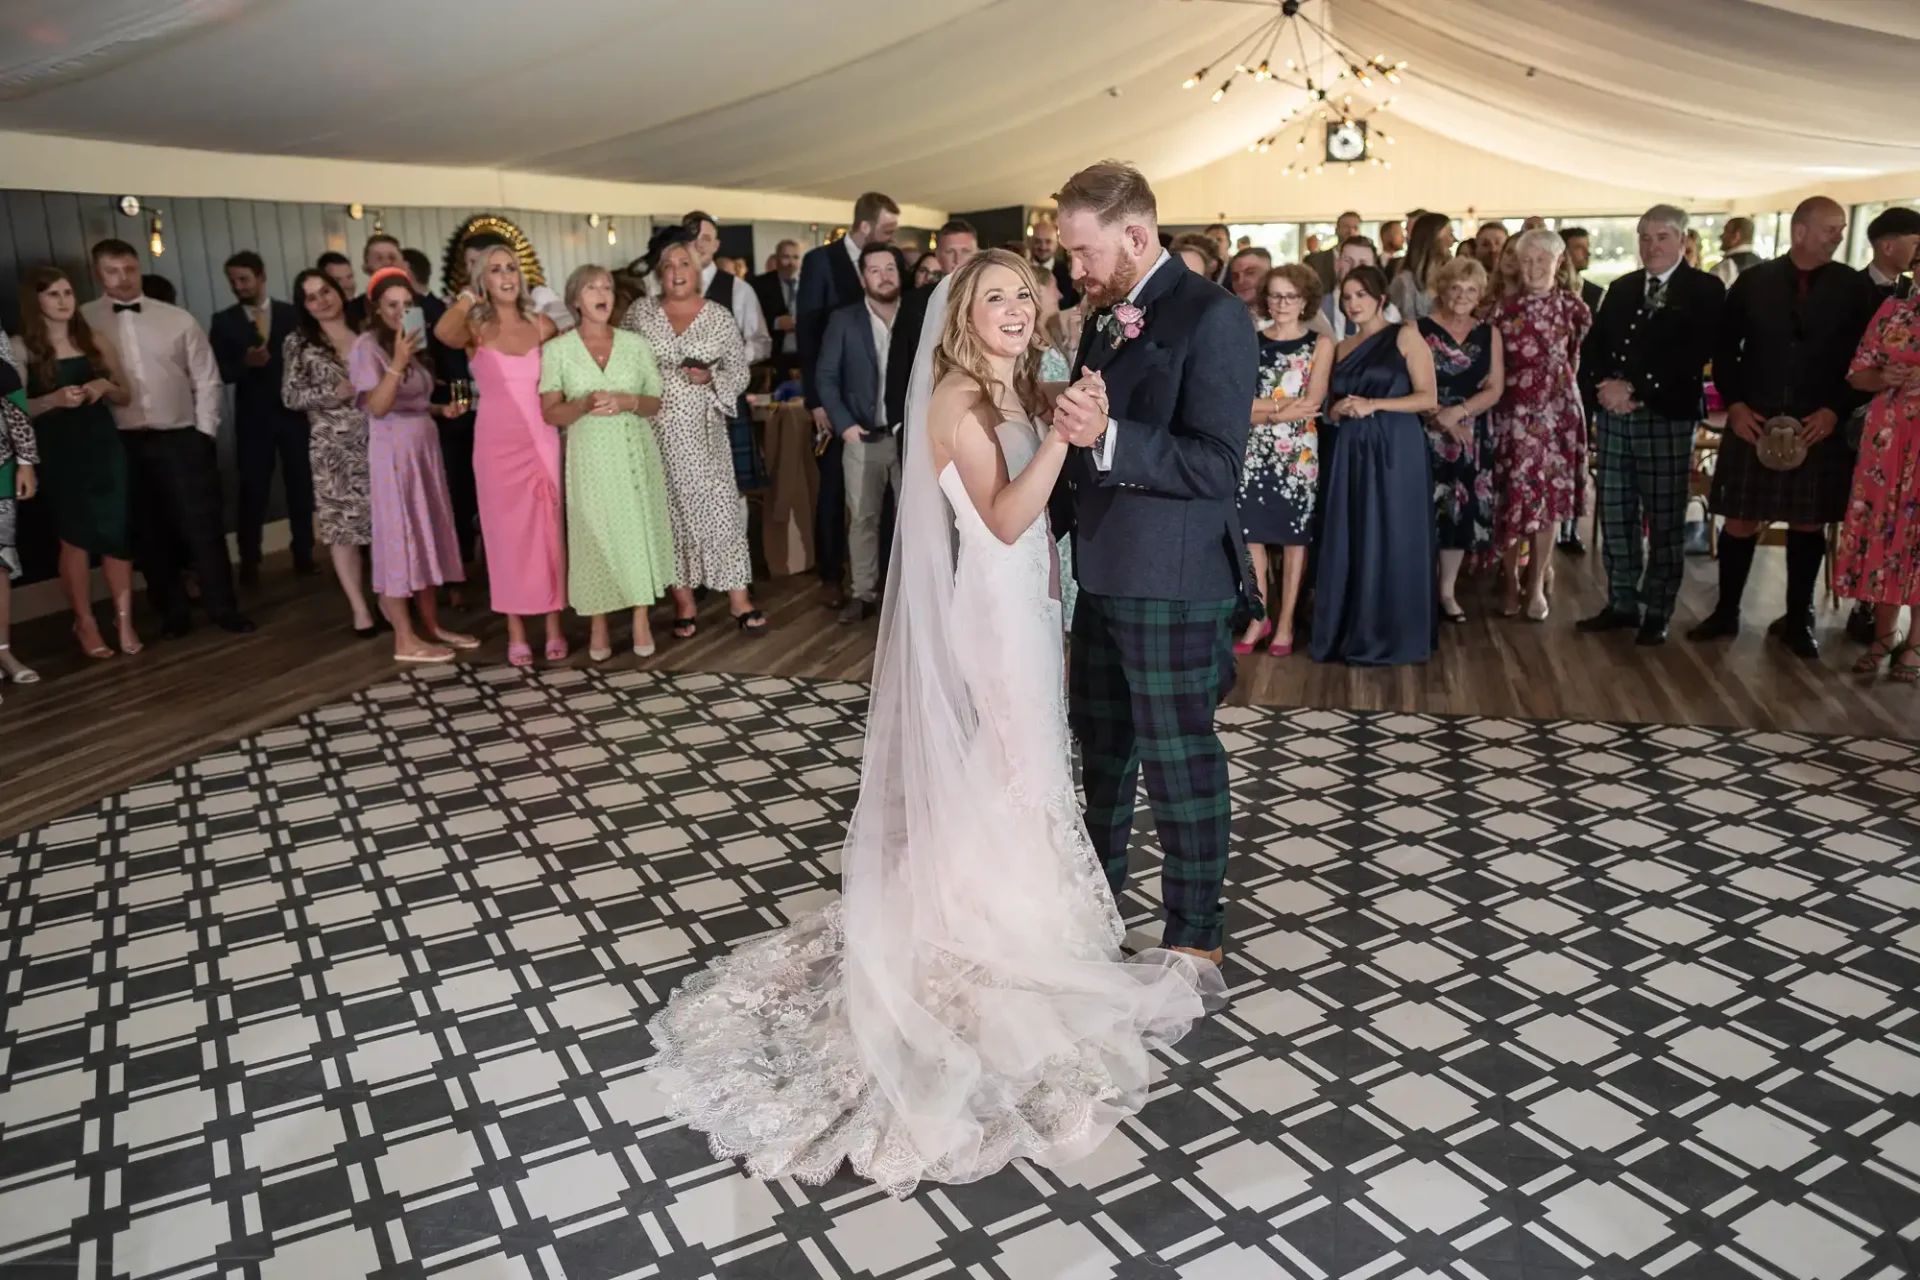 A bride and groom share their first dance surrounded by guests in a tent with a checkered floor.